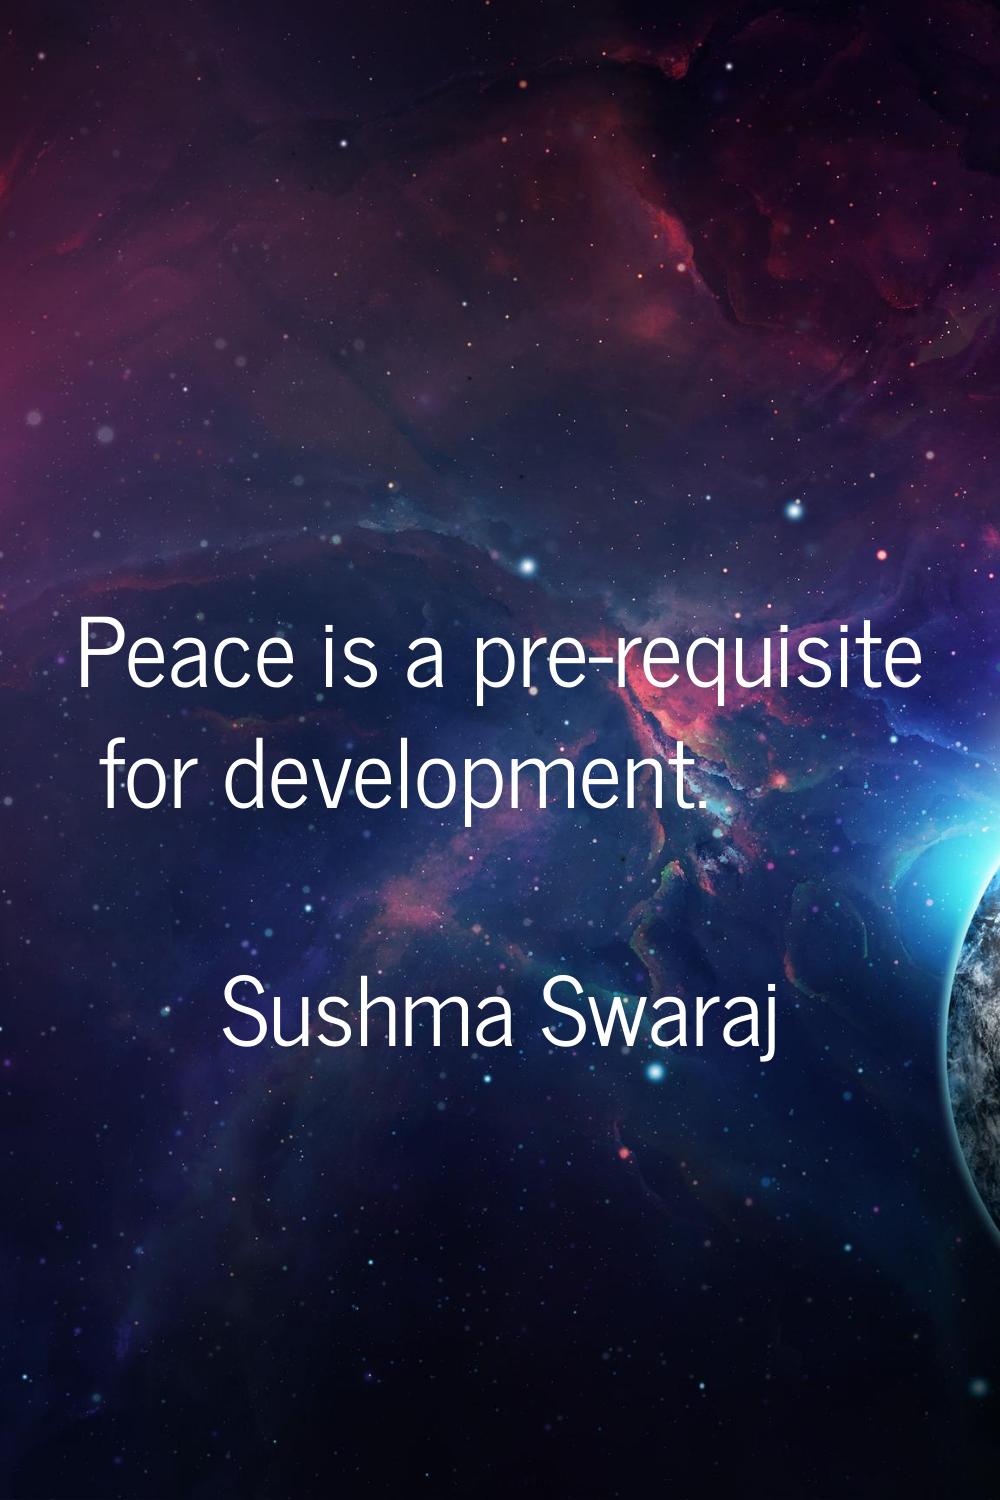 Peace is a pre-requisite for development.